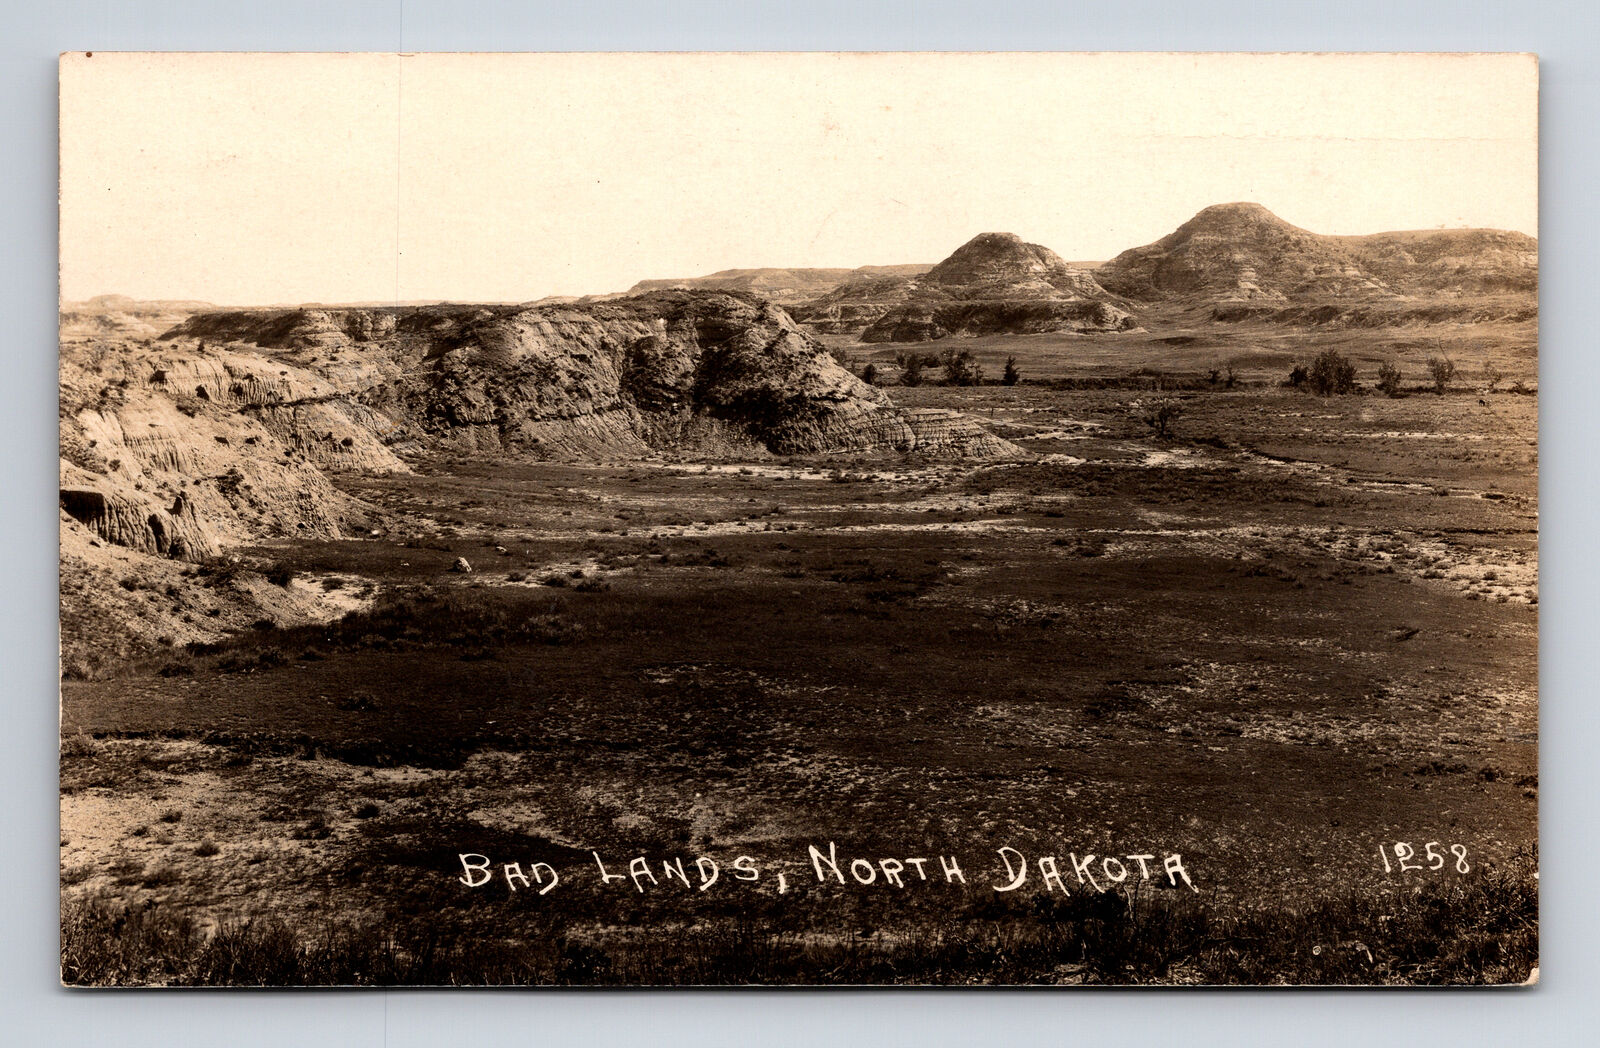 1931 RPPC Scenic View Bad Lands Posted From Ryder ND Crecent Real Photo Postcard